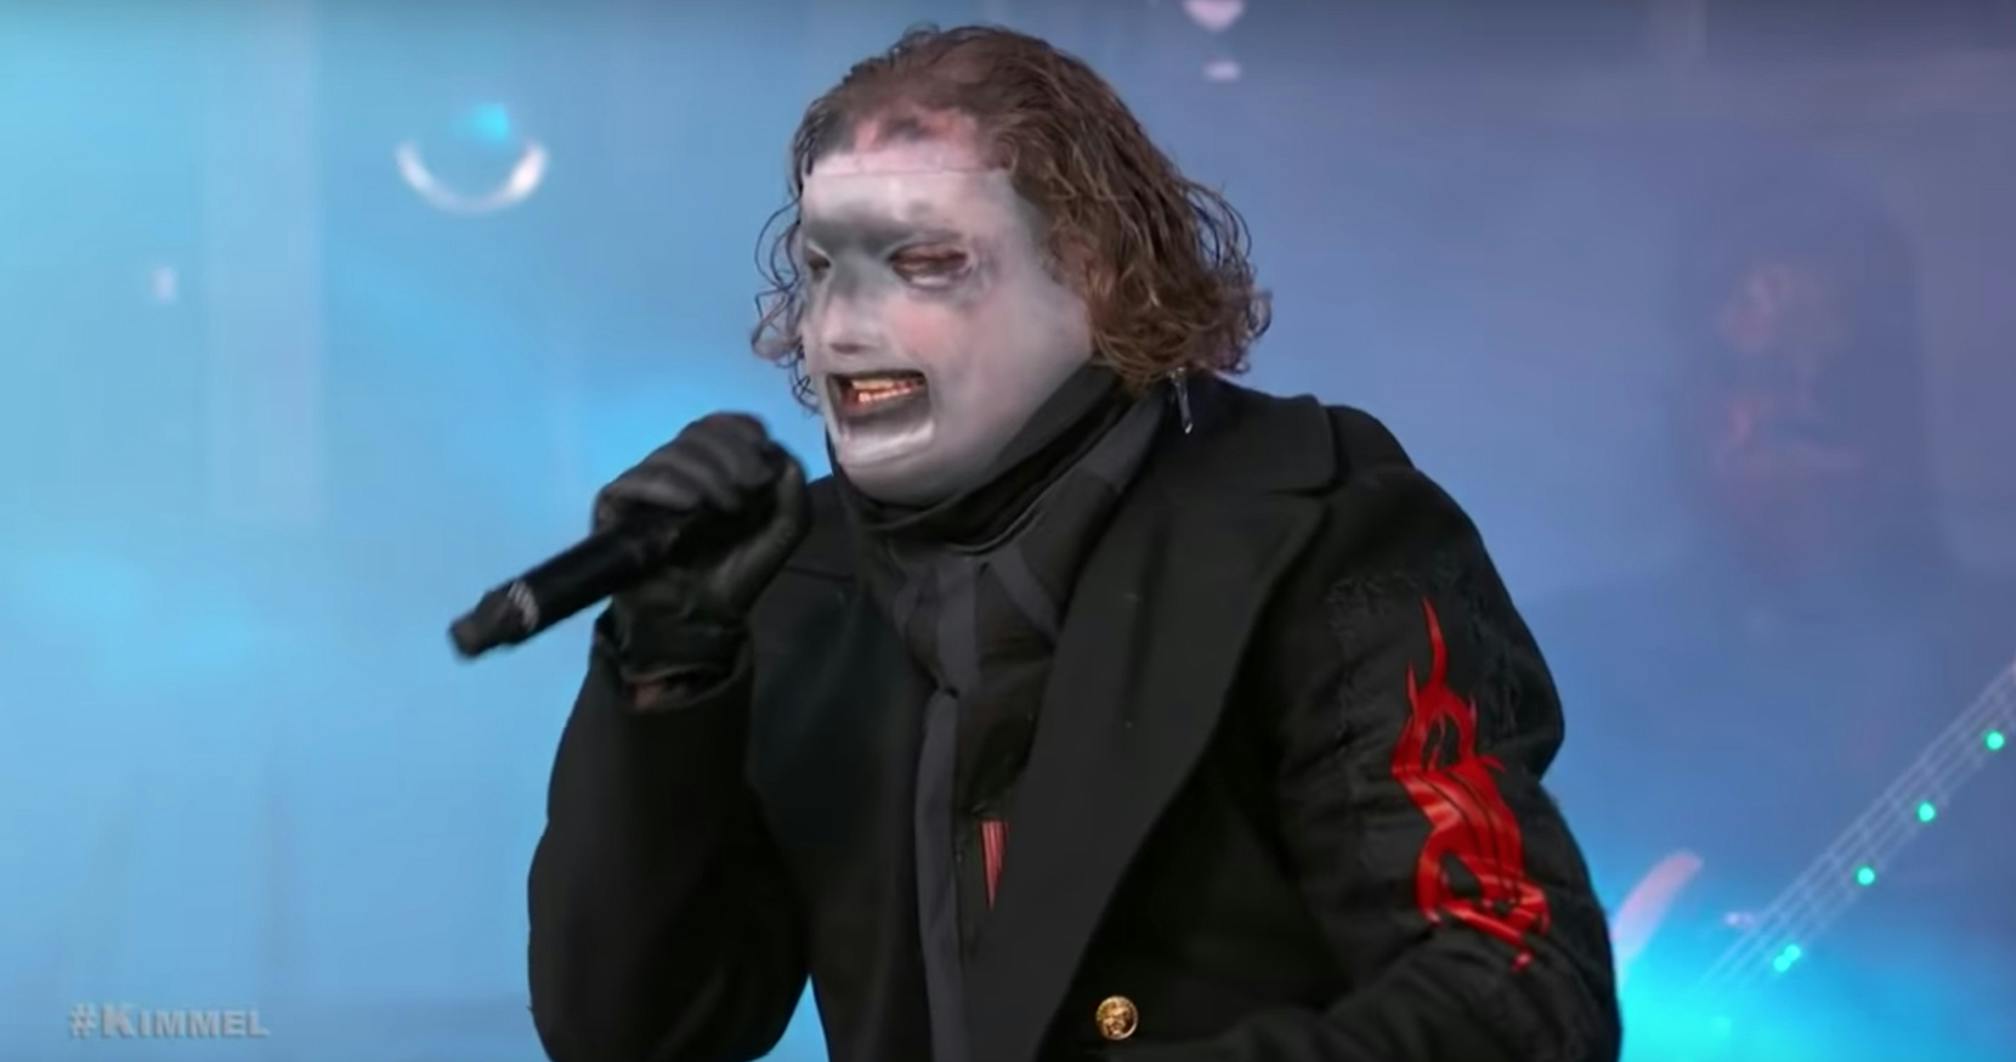 Watch Slipknot Perform Unsainted And All Out Life Live For The First Time